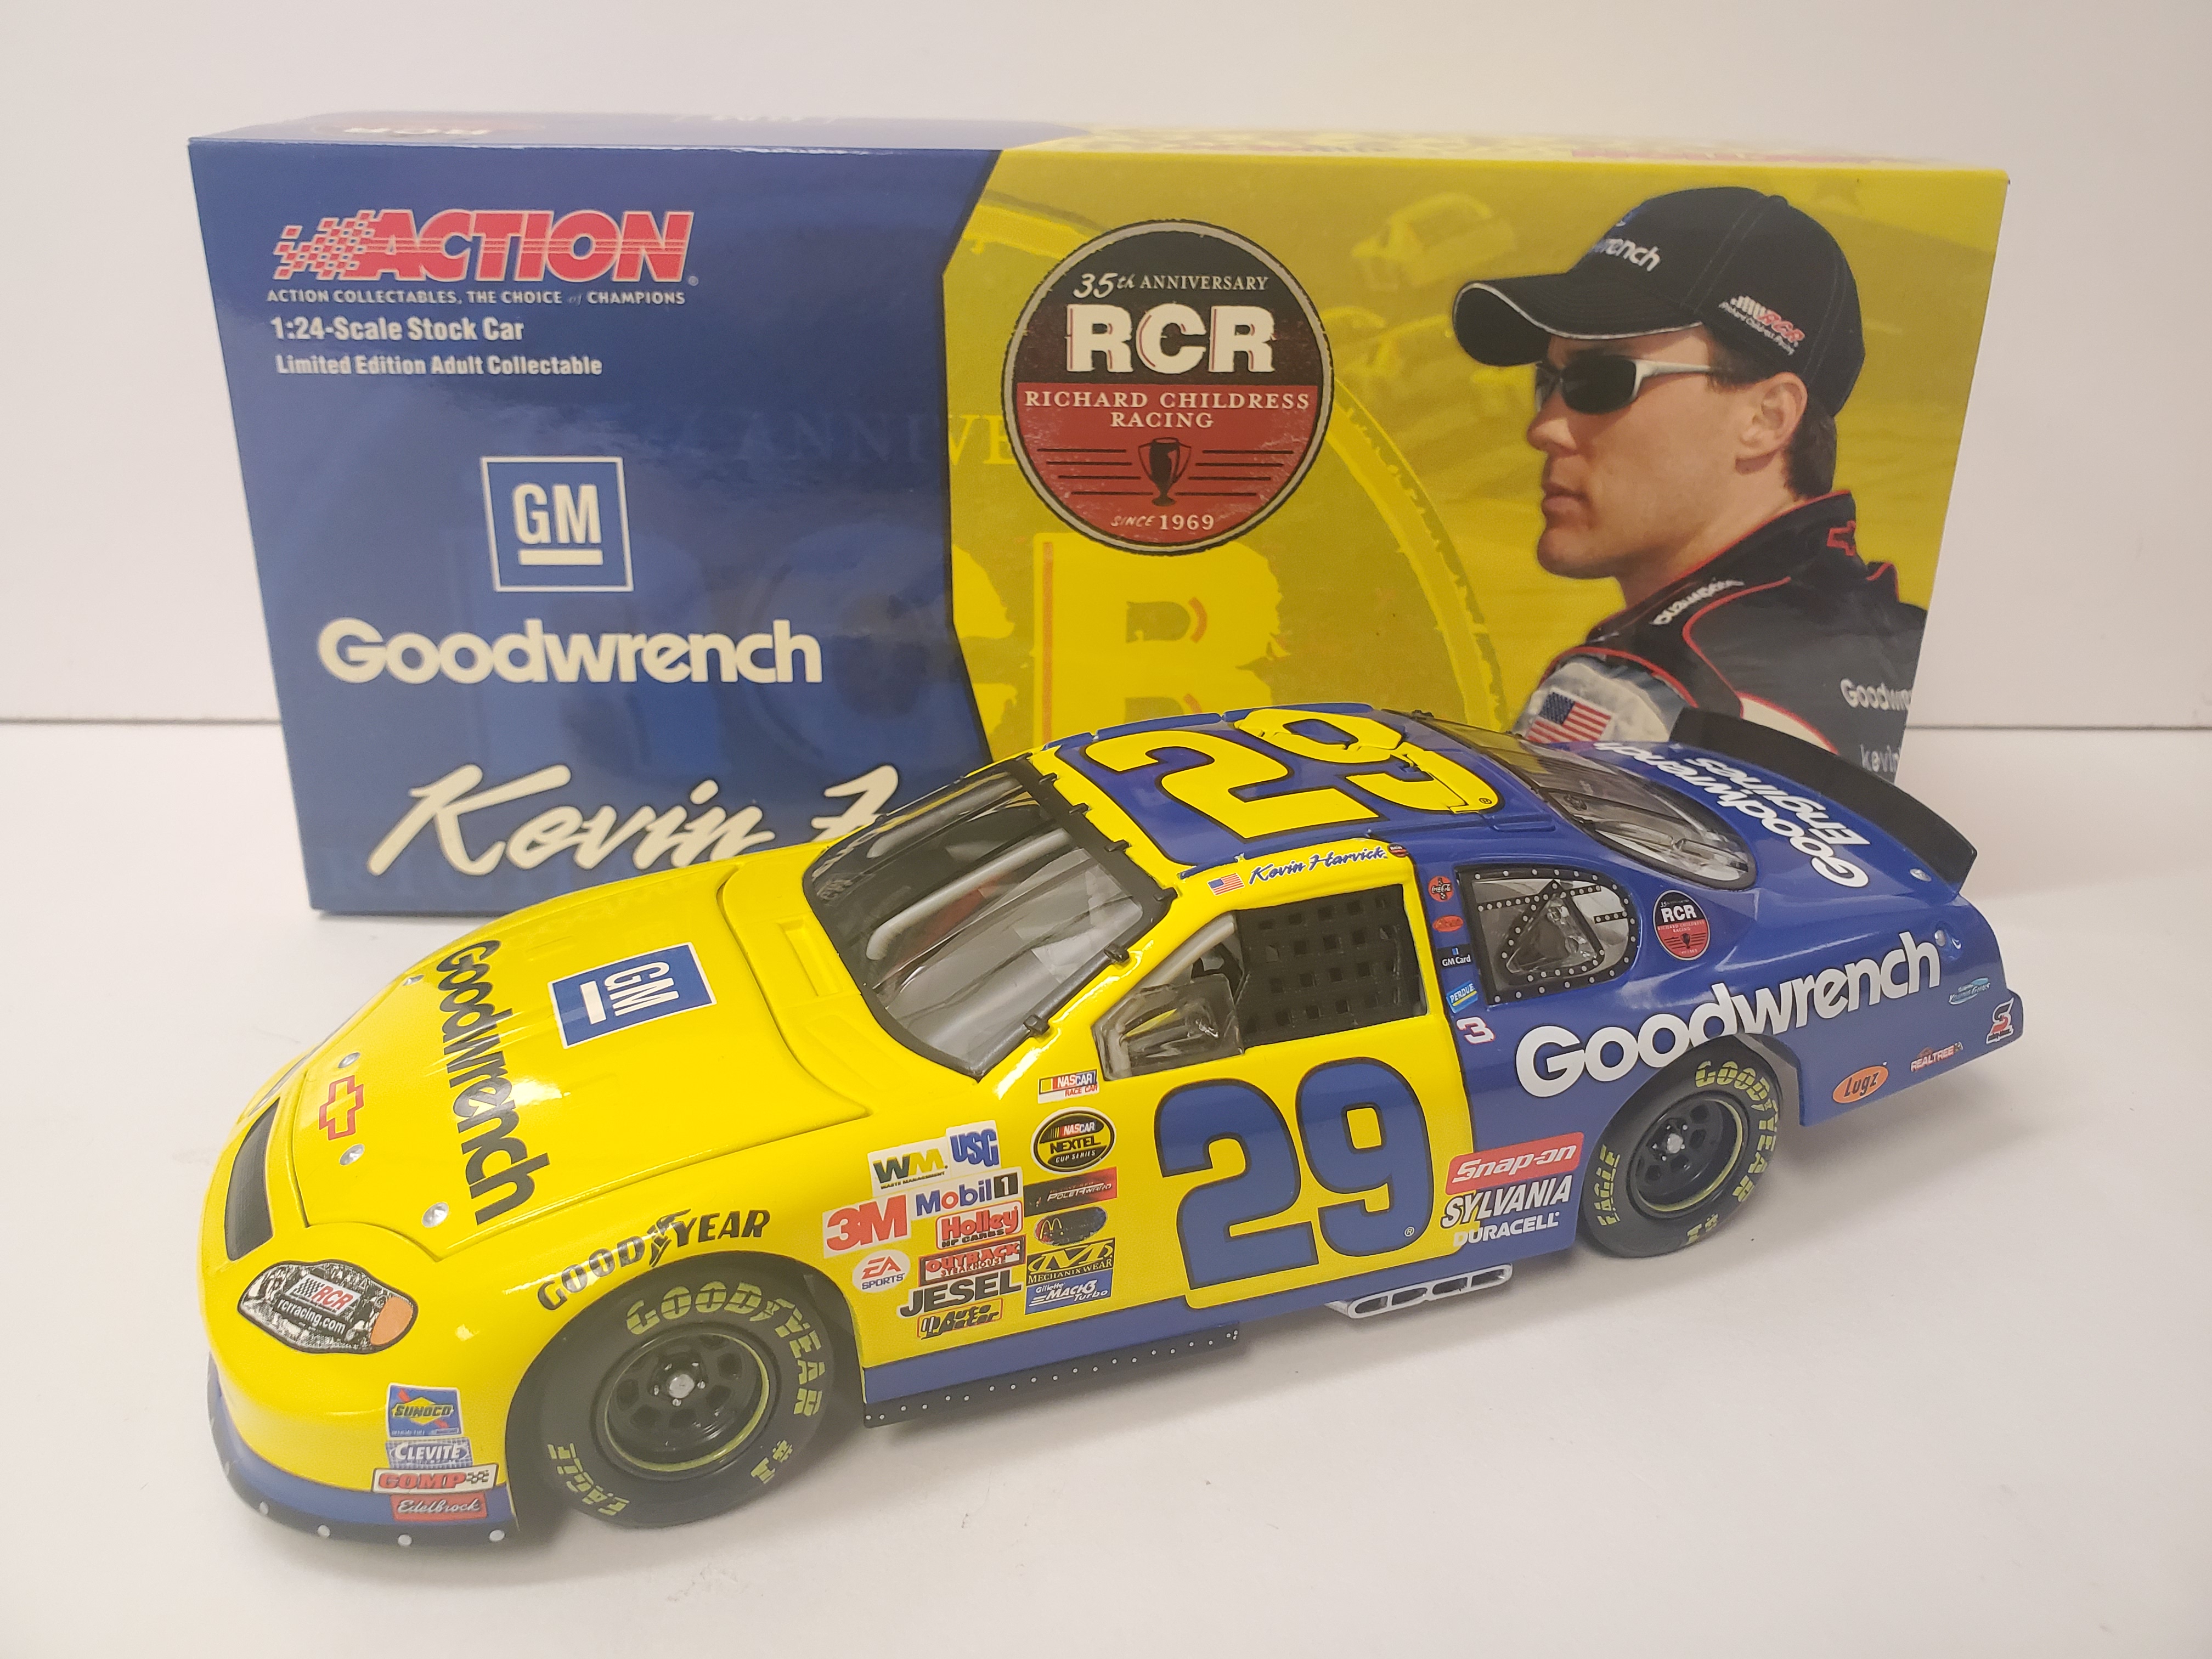 2004 #29 Kevin Harvick GM Goodwrench RCR 35th Anniversary 1/24 Action Diecast for sale online 